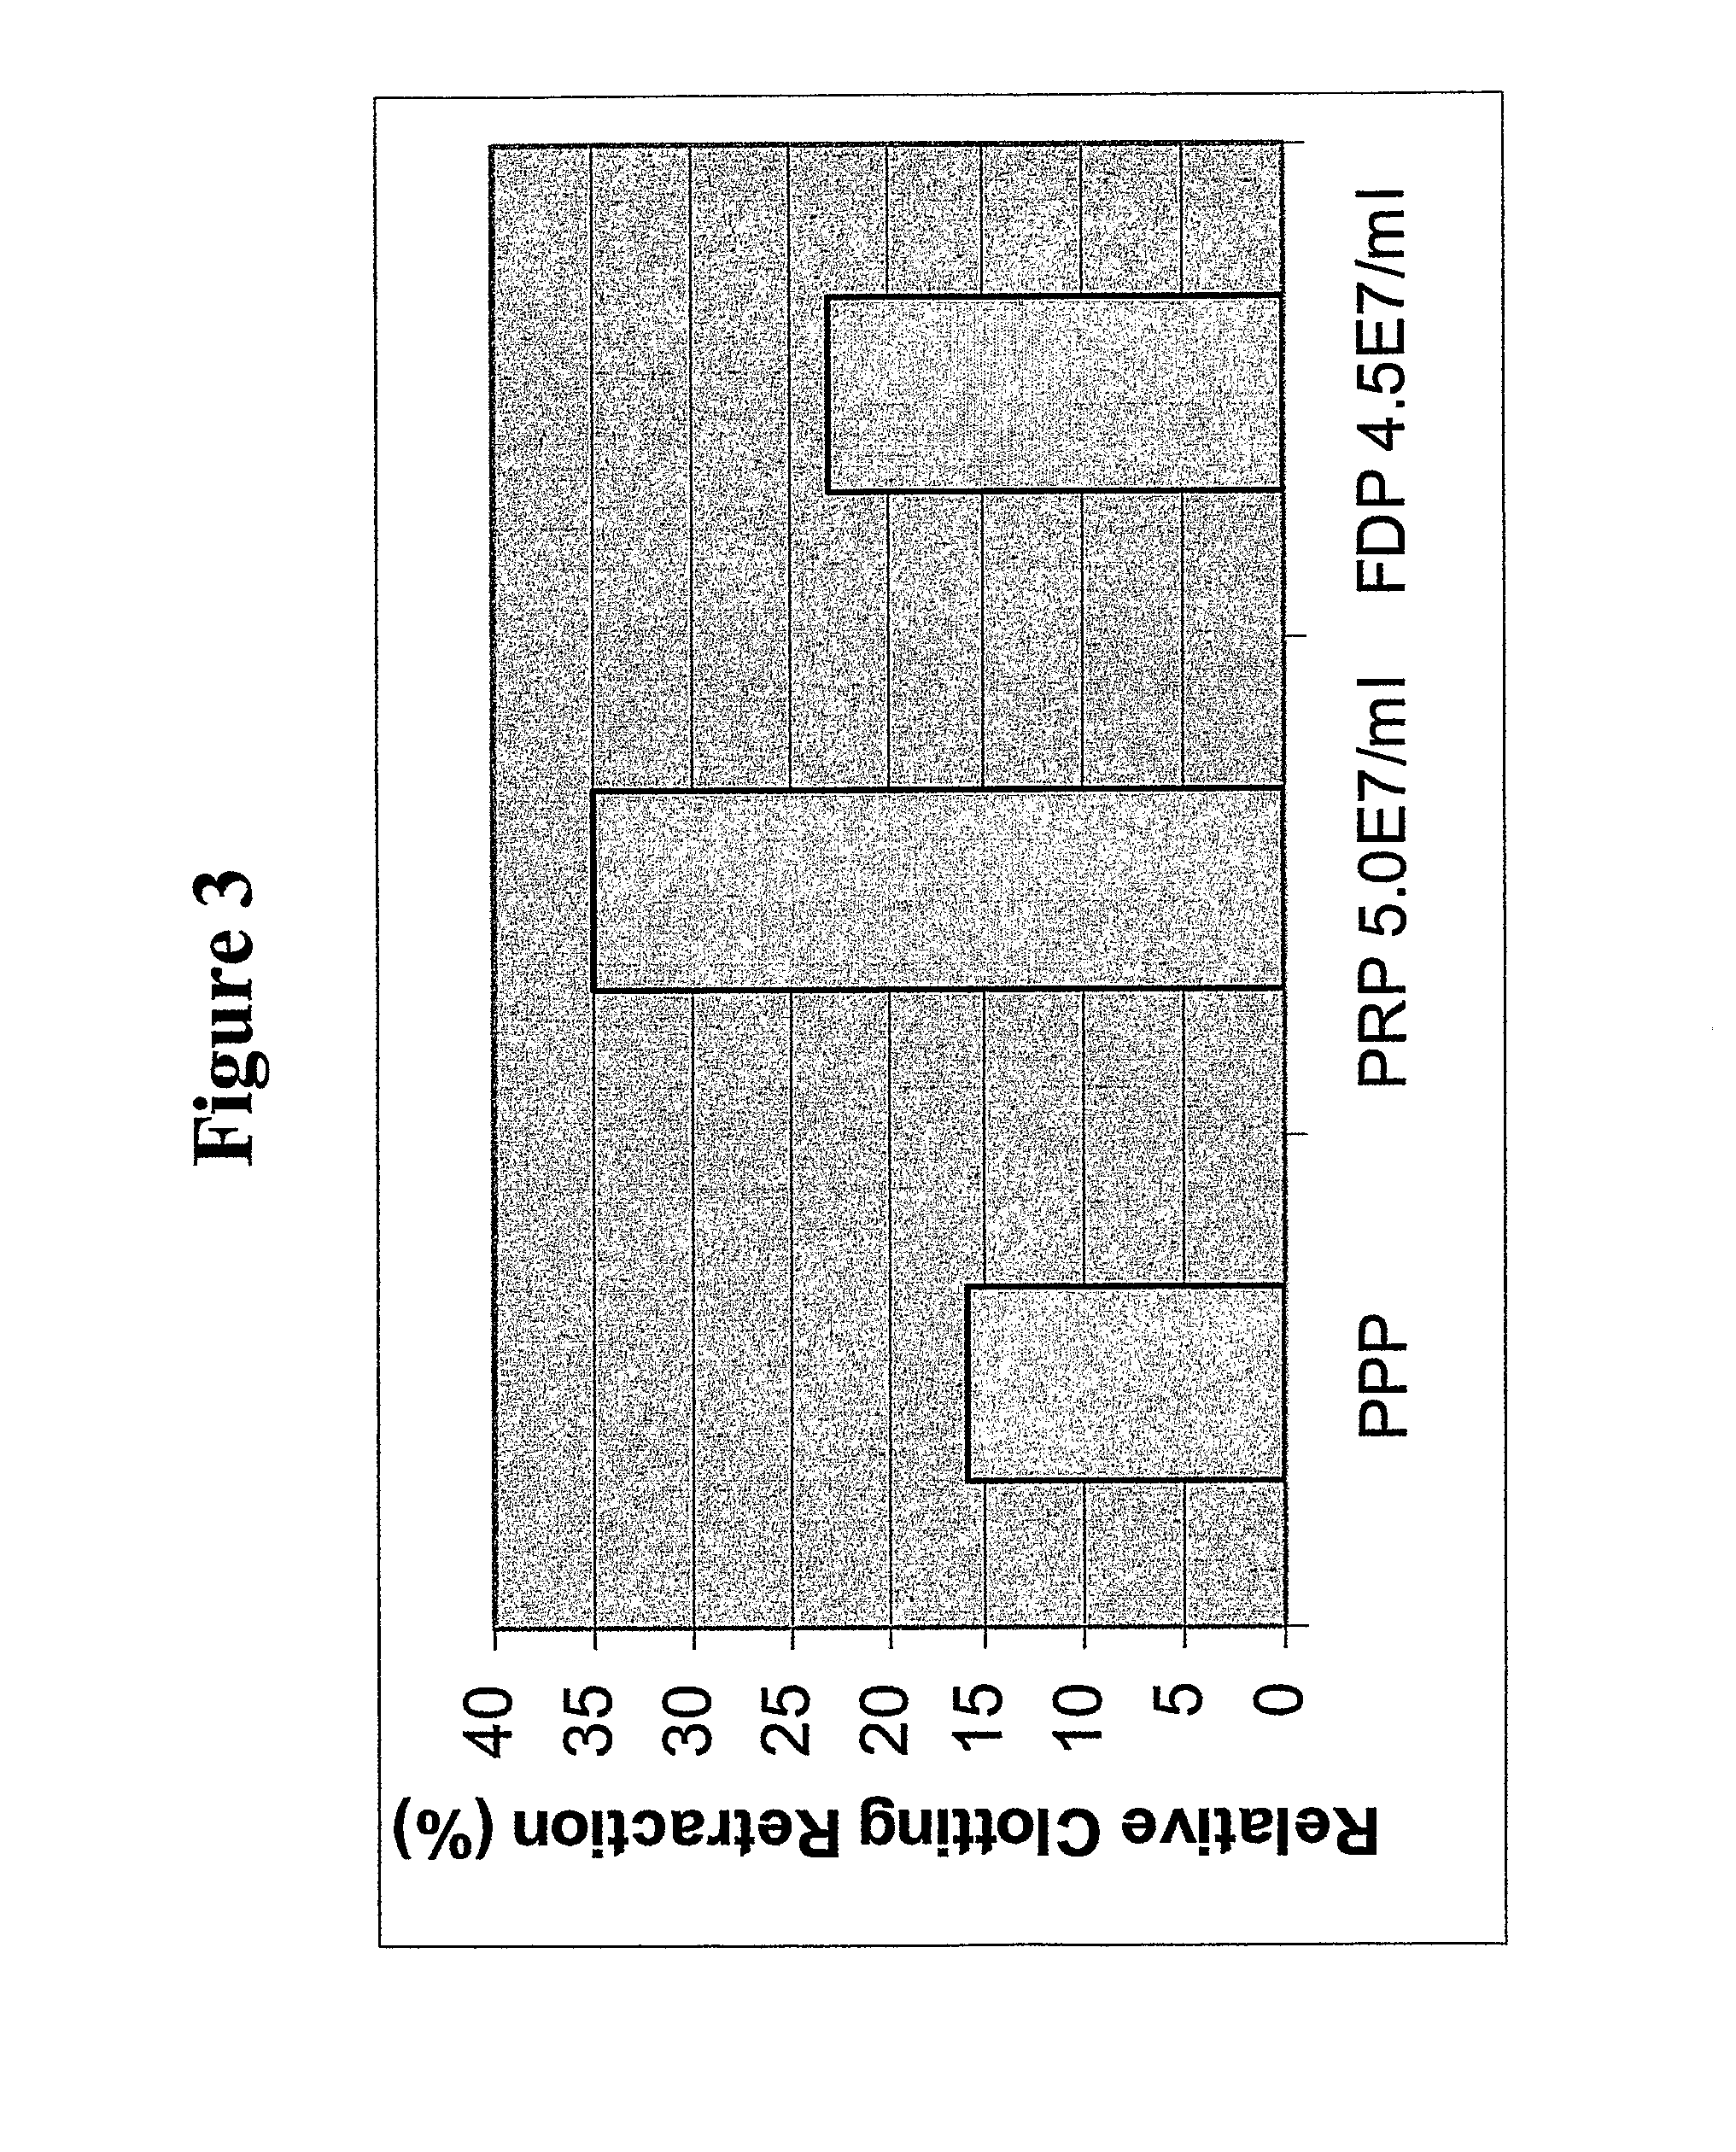 Methods for preparing freeze-dried platelets, compositions comprising freeze-dried platelets, and methods of use